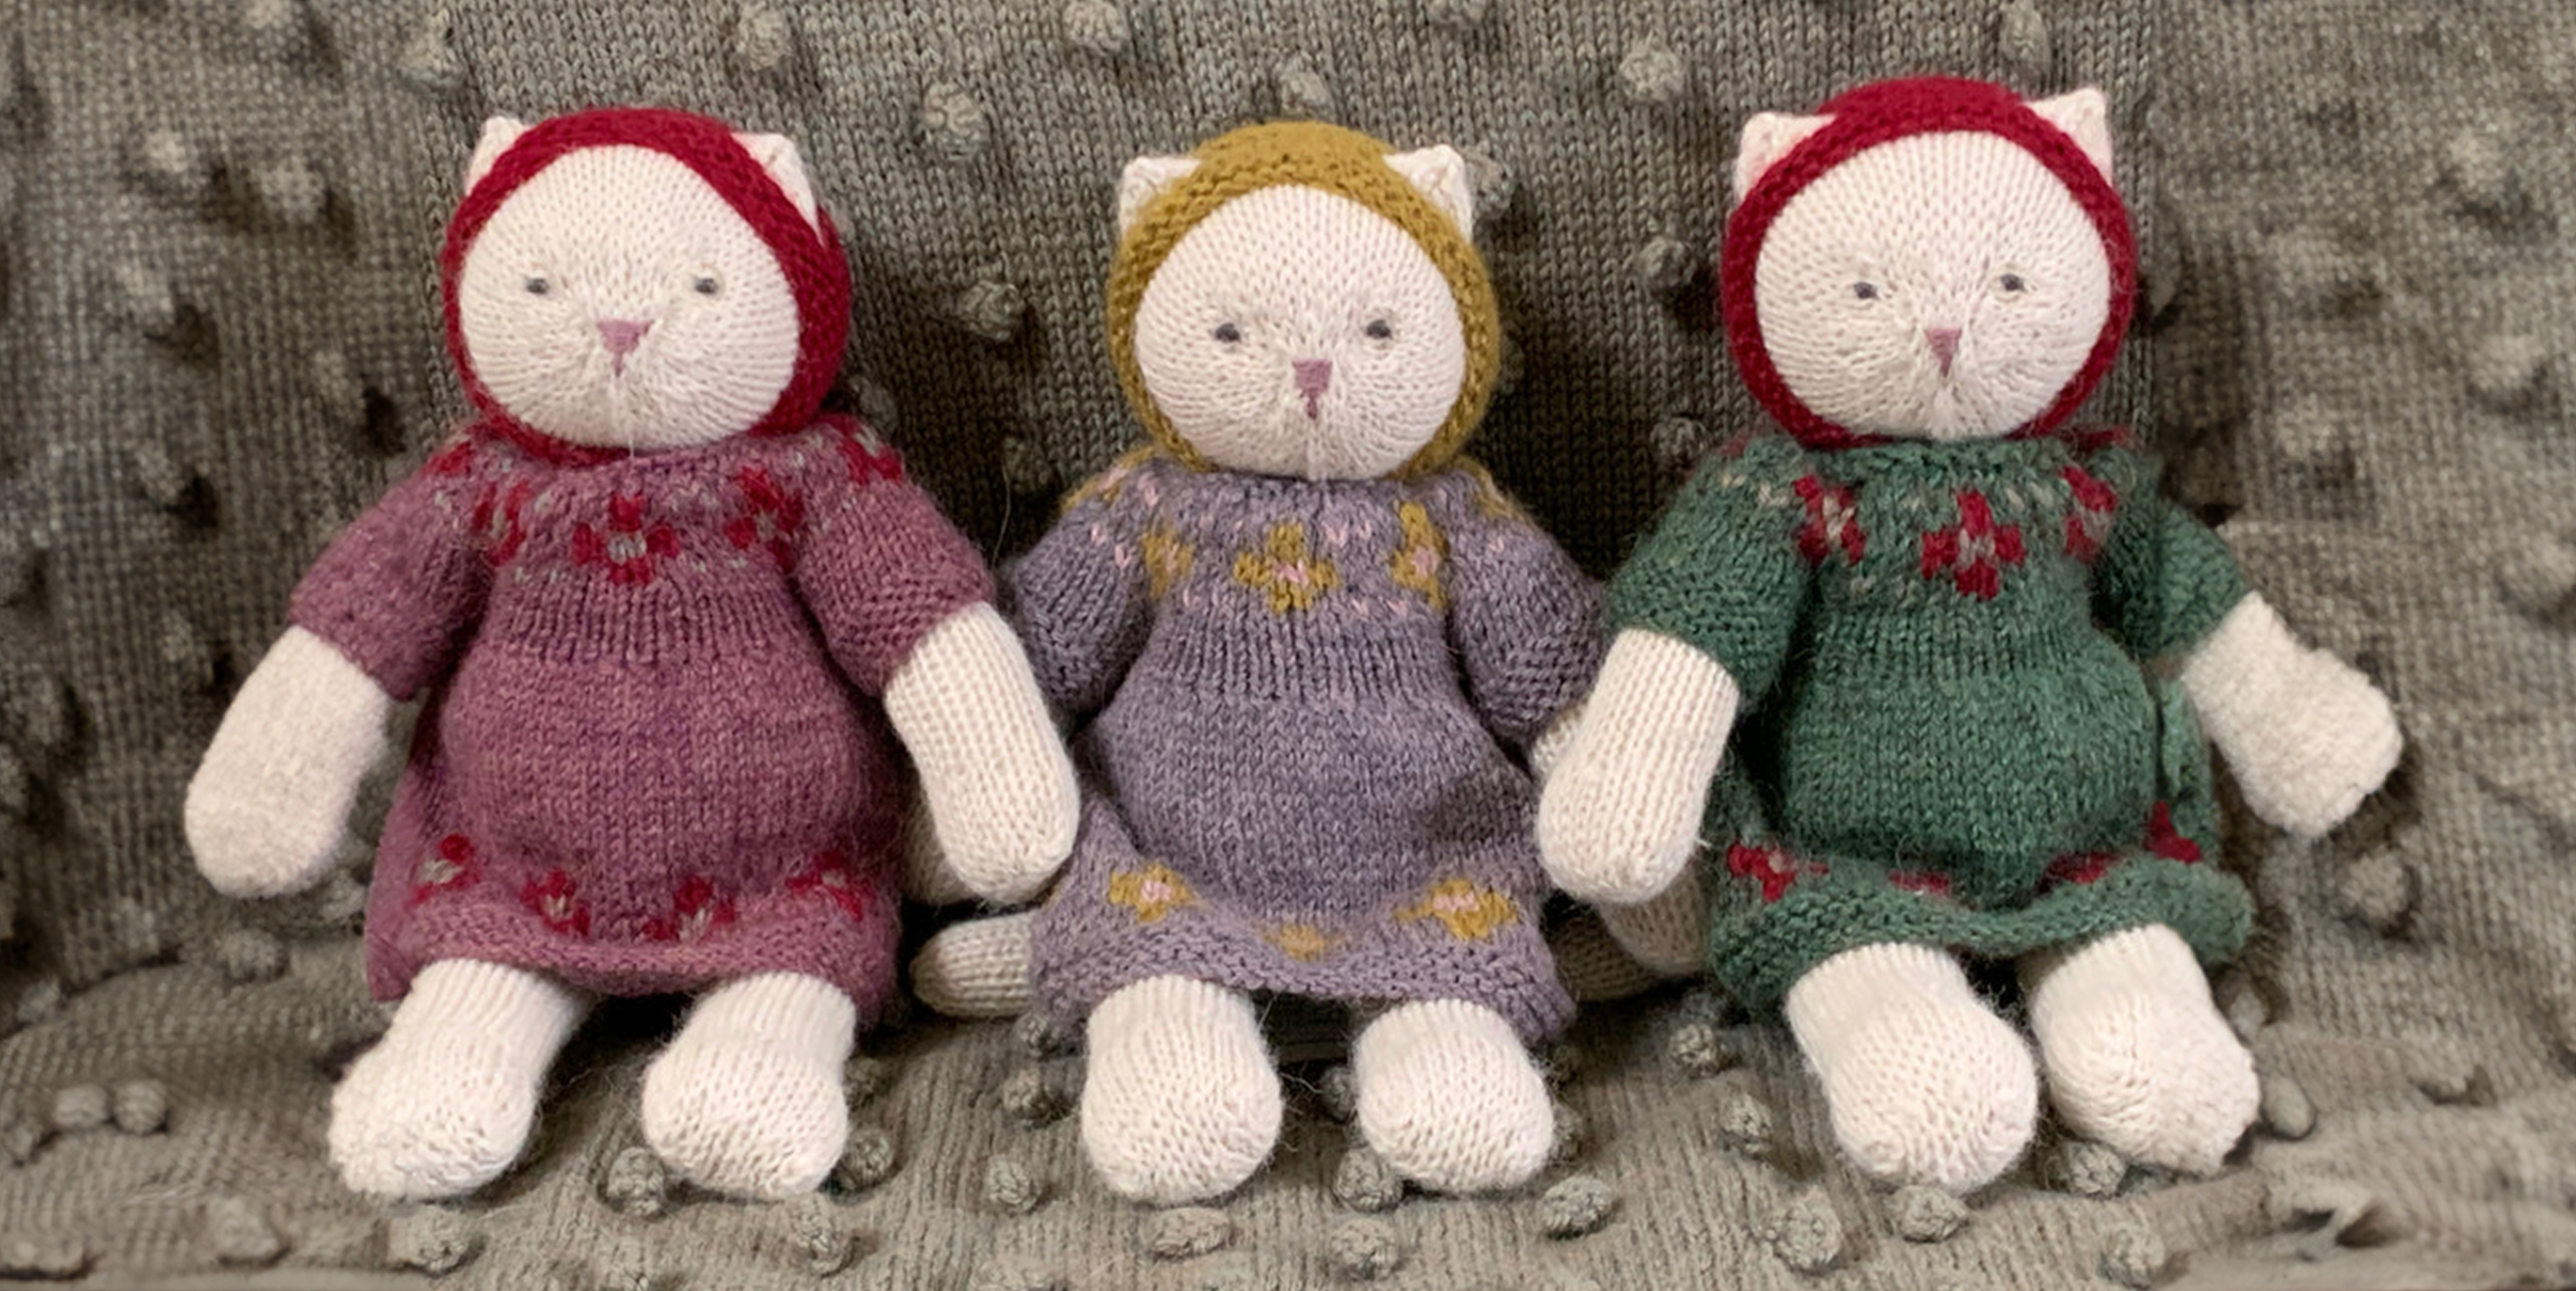 Hand-knitted toys